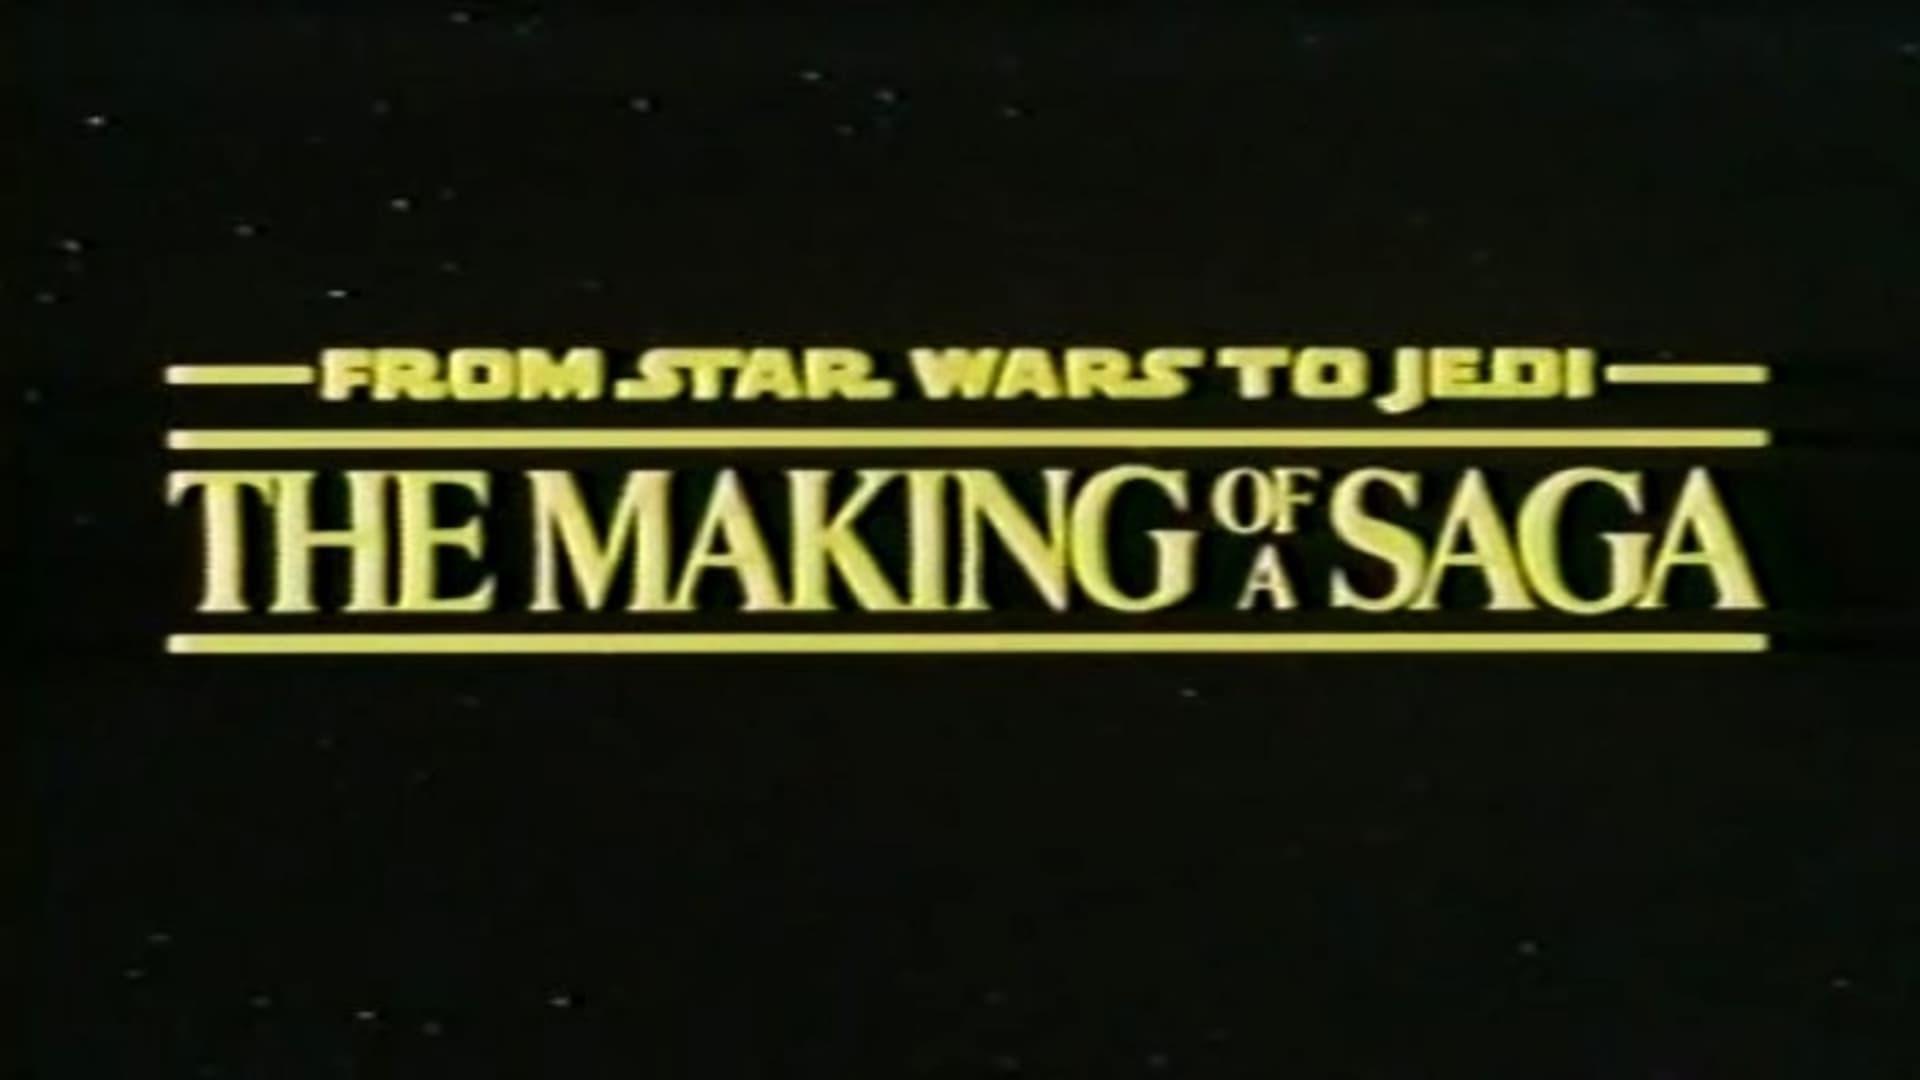 From 'Star Wars' to 'Jedi' : The Making of a Saga backdrop